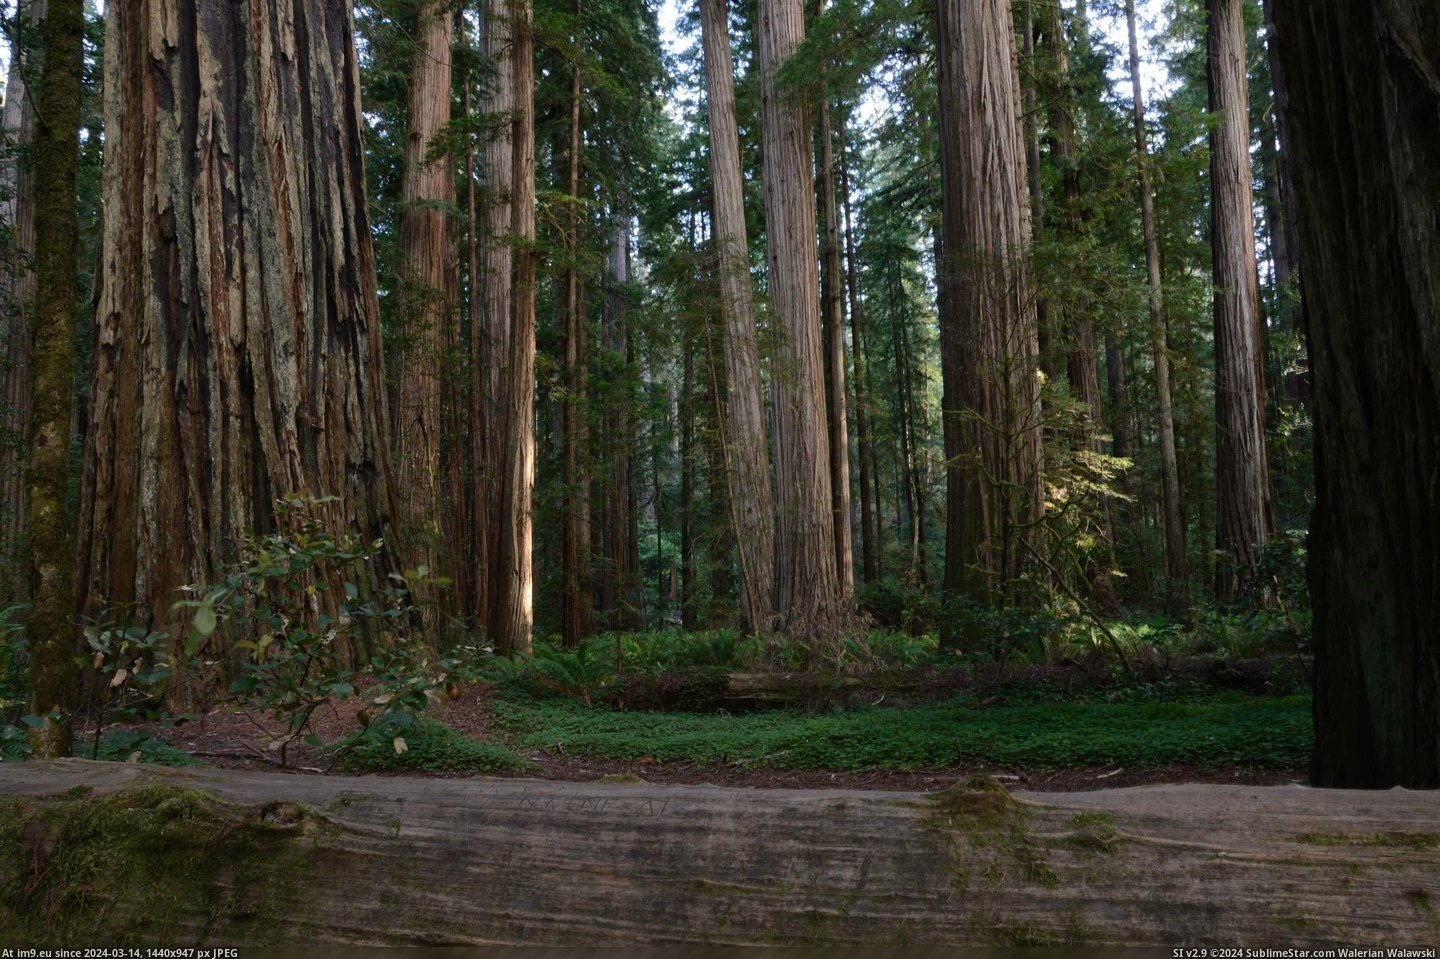 #Park #California #State #Redwoods #Jedediah #Smith #Redwood #Speaking [Earthporn] Speaking of Redwoods: Jedediah Smith Redwood State Park, California, [2710x1795] [OC] Pic. (Изображение из альбом My r/EARTHPORN favs))